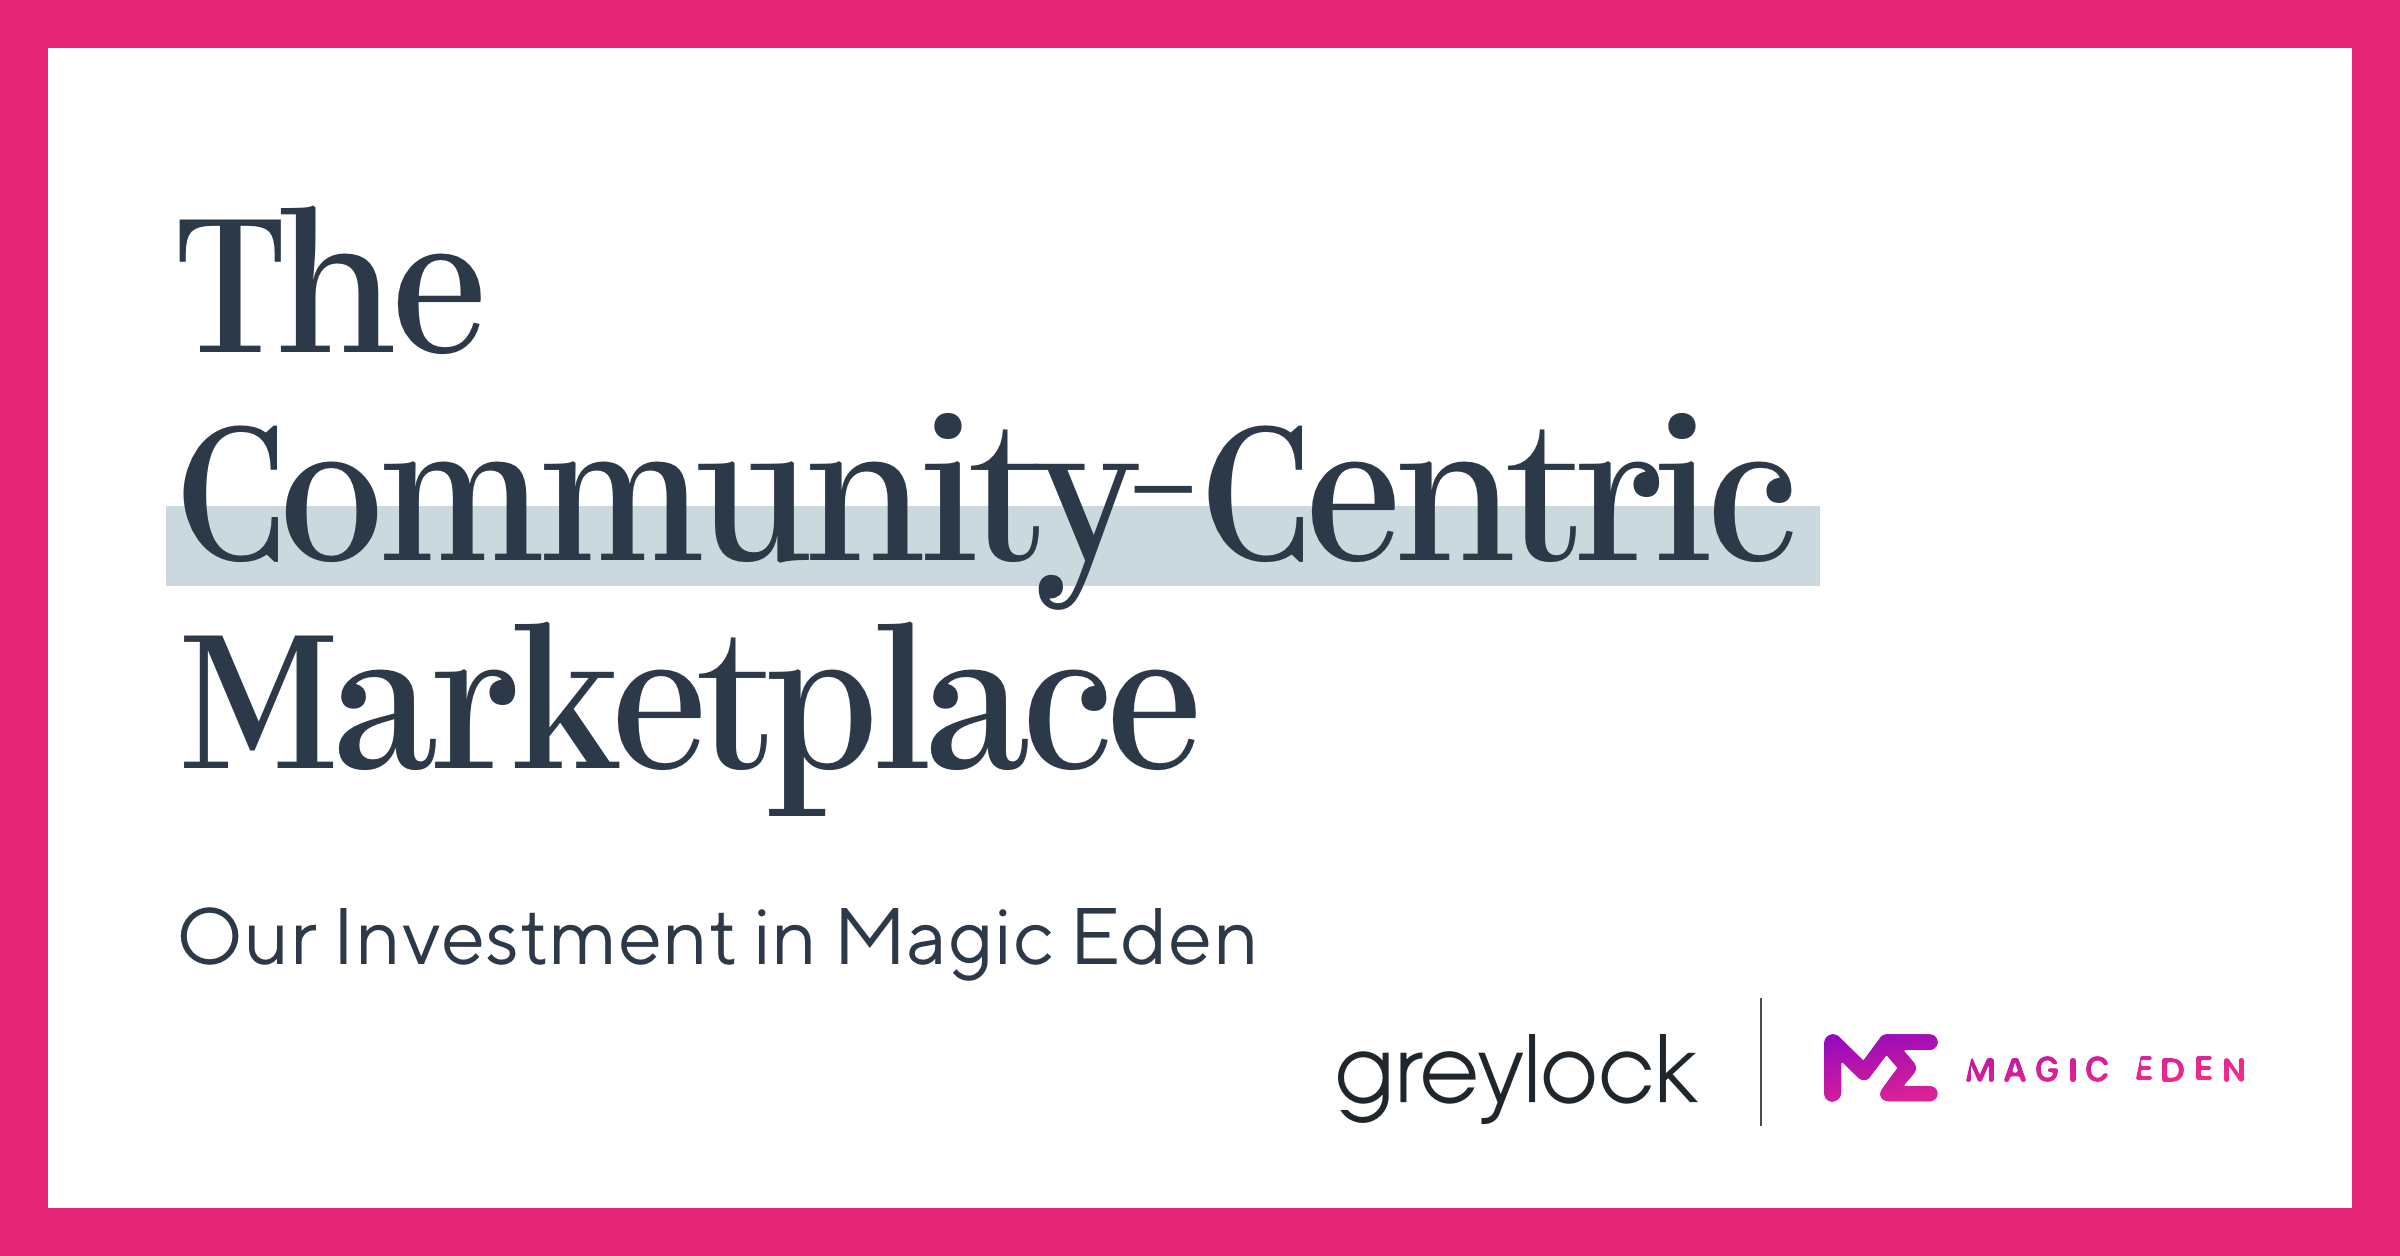 The Community-Centric Marketplace